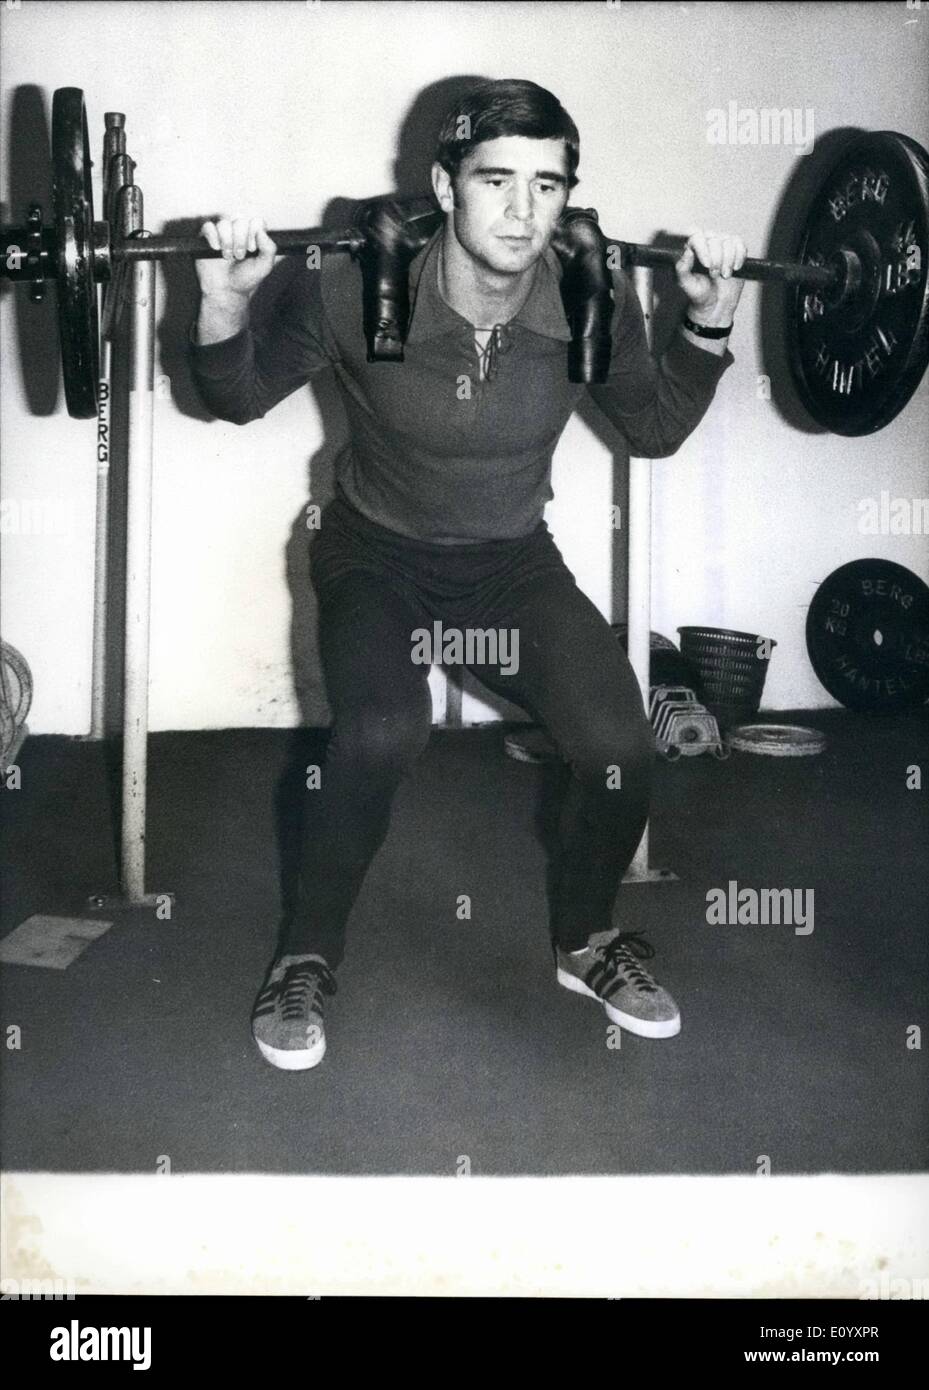 Oct. 10, 1971 - Erhard Keller is Preparing Himself with intensive training for the coming session: Training very hard is Erhard Stock Photo